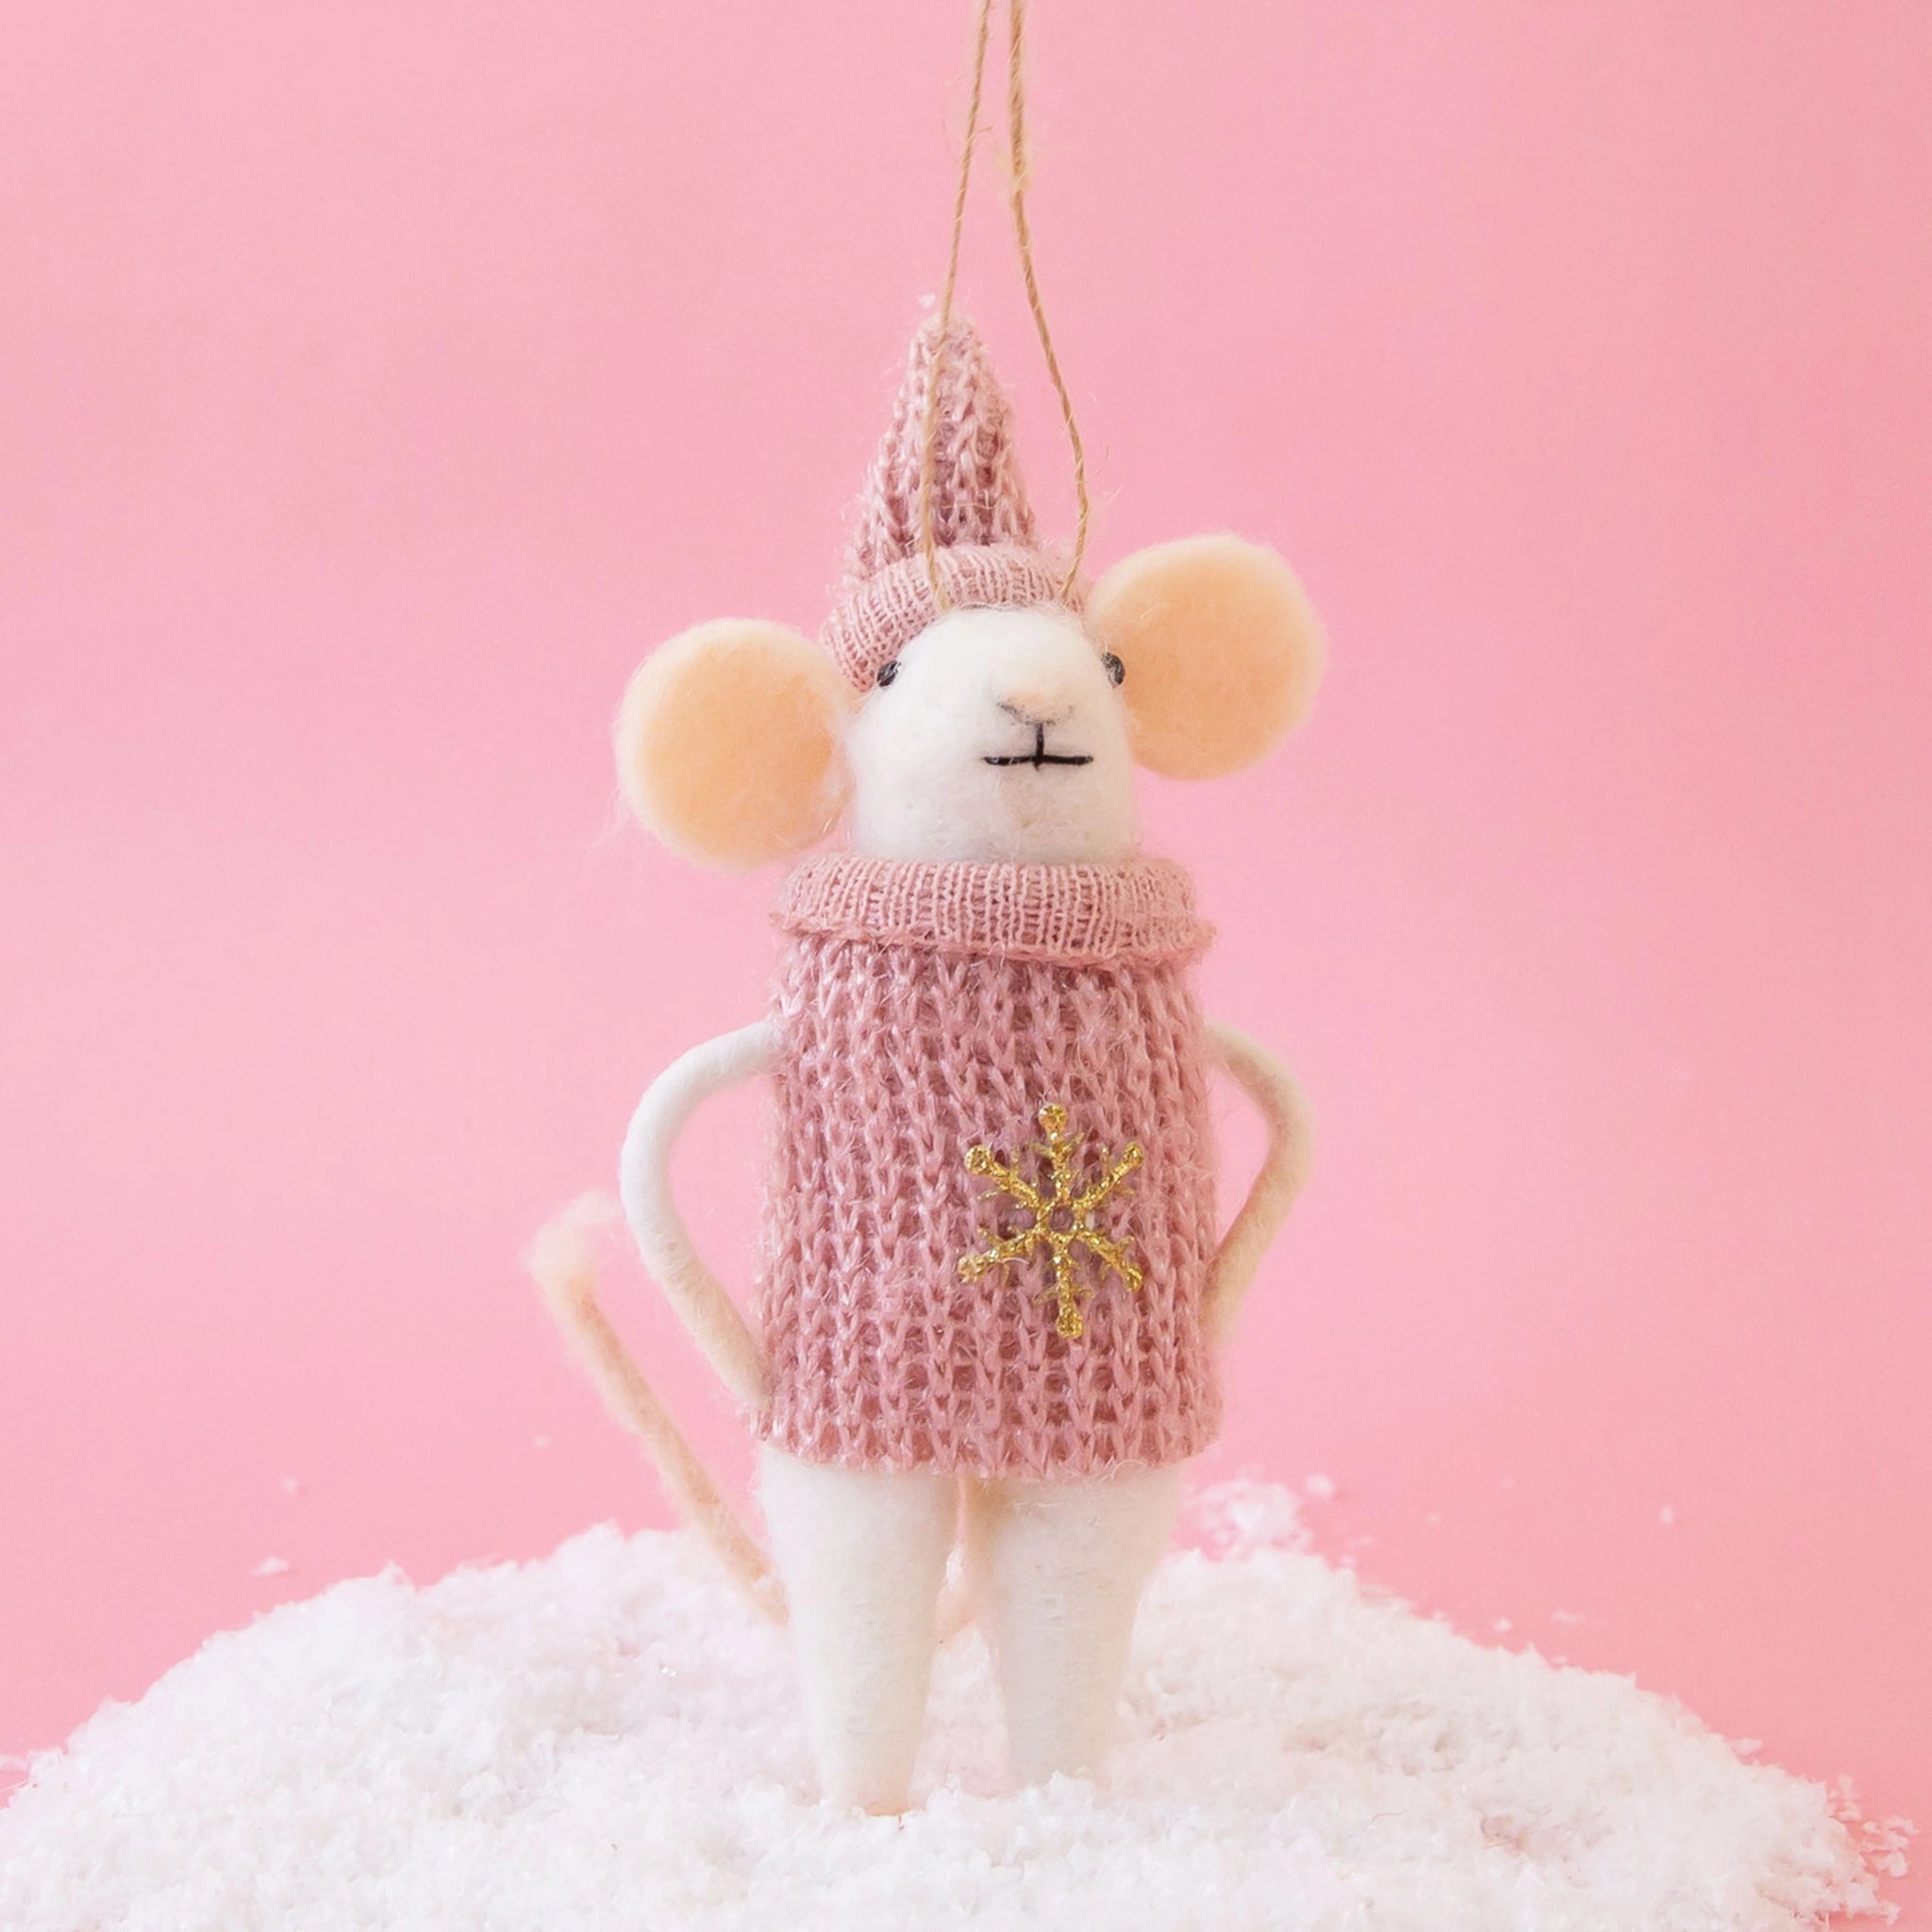 On a pink background is a white felt mouse ornament wearing a pink knit sweater and hat. 